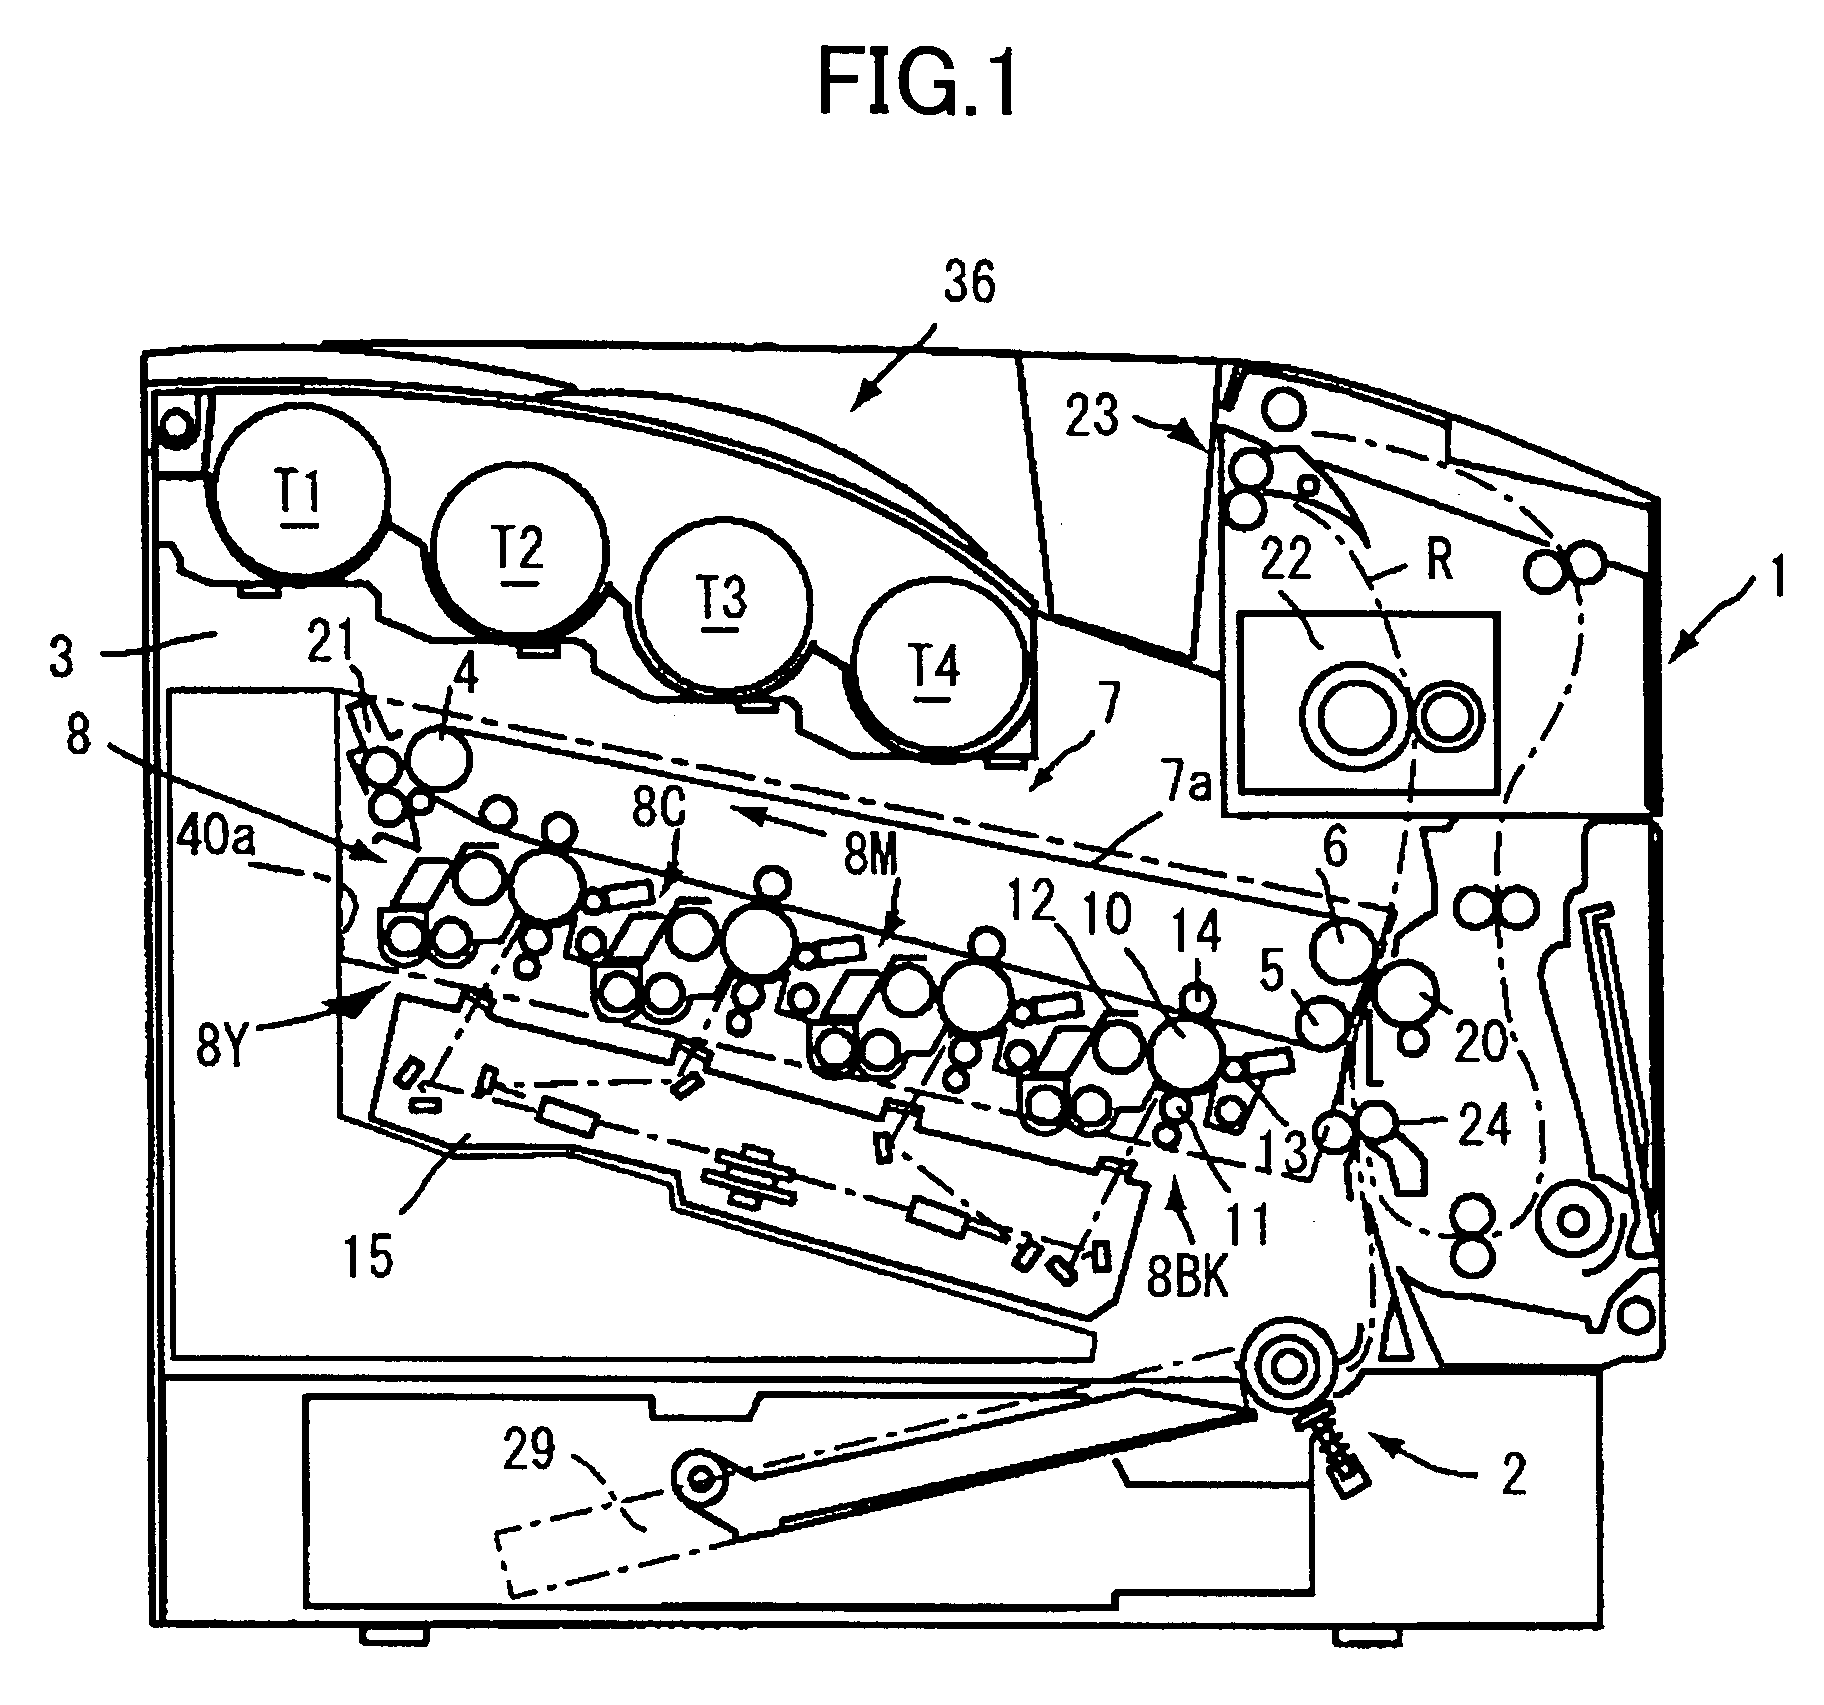 Image forming apparatus for reliably holding attachable units